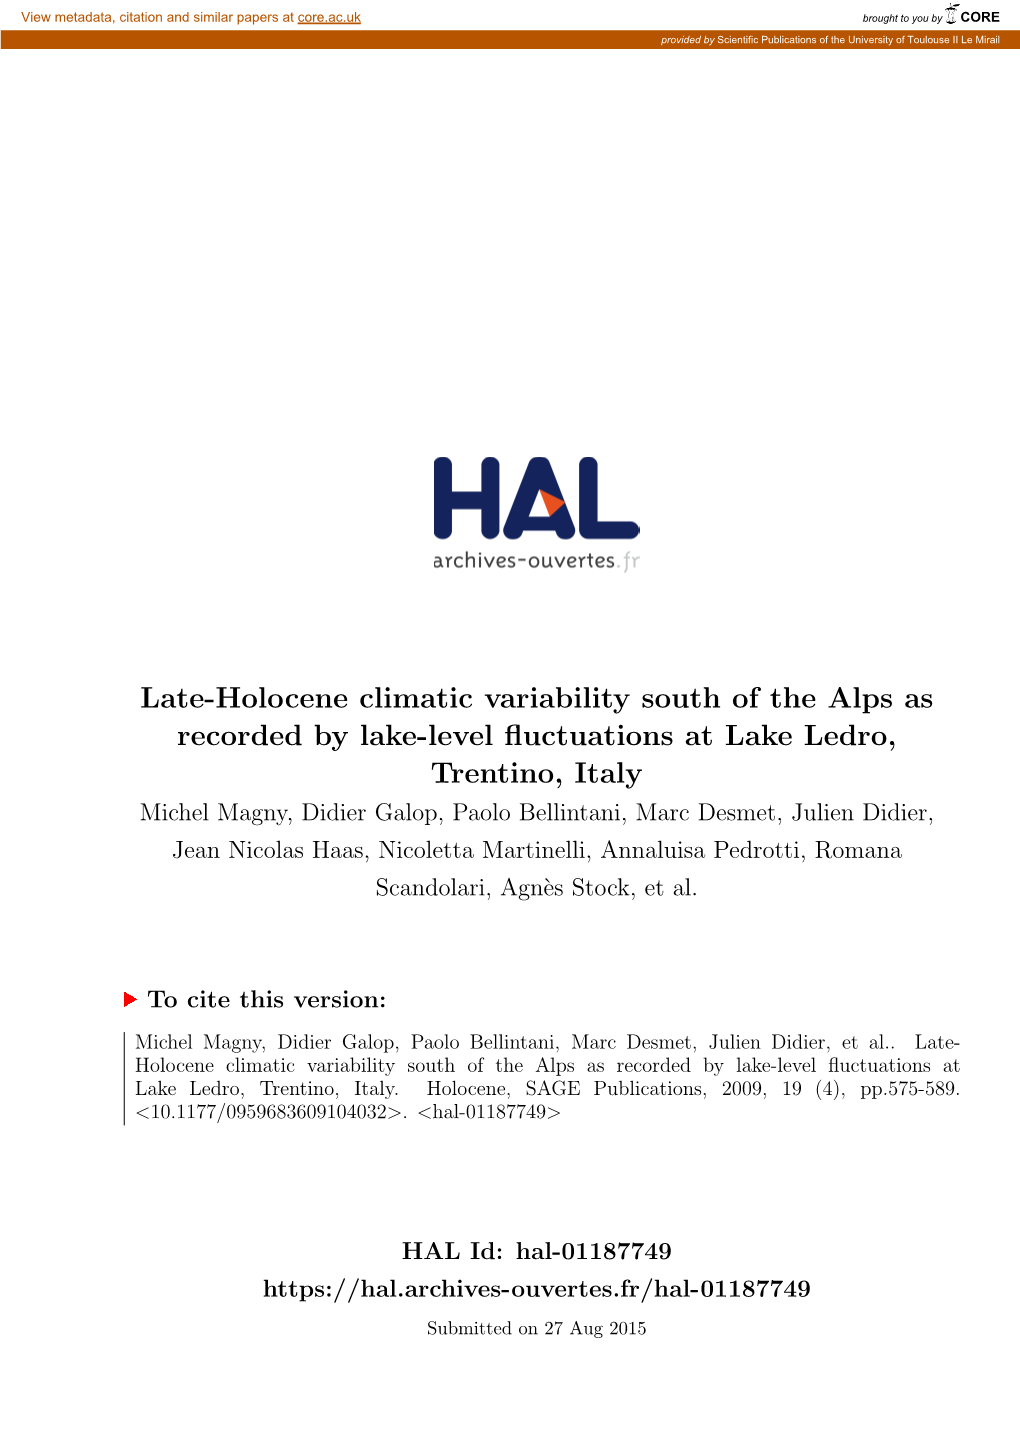 Late-Holocene Climatic Variability South of the Alps As Recorded By